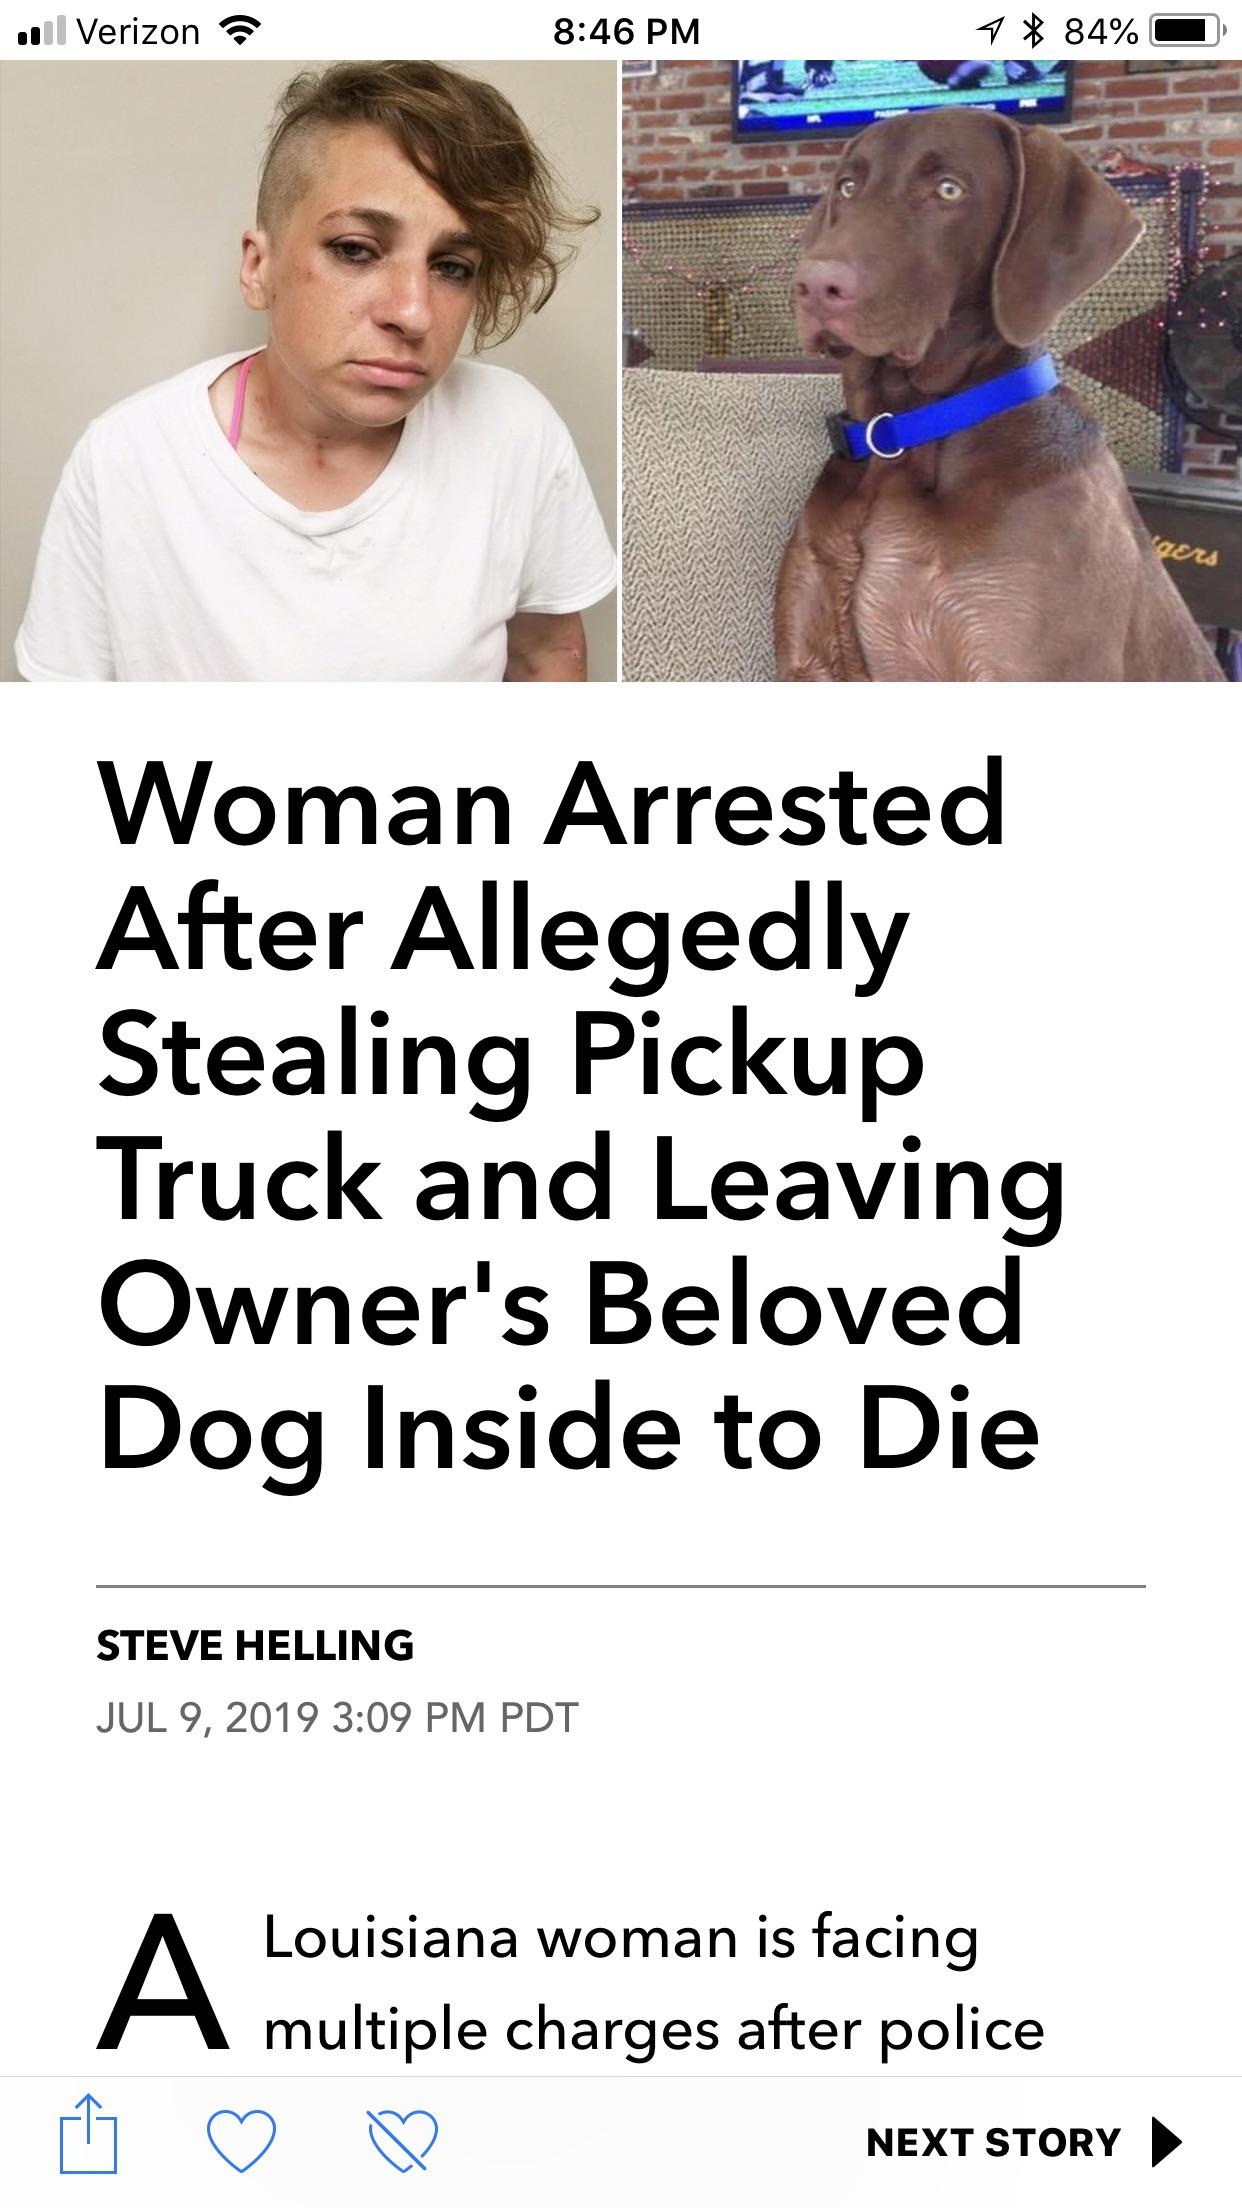 human - .nl Verizon 7 84% Dems Woman Arrested After Allegedly Stealing Pickup Truck and Leaving Owner's Beloved Dog Inside to Die Steve Helling Pdt Louisiana woman is facing multiple charges after police Next Story